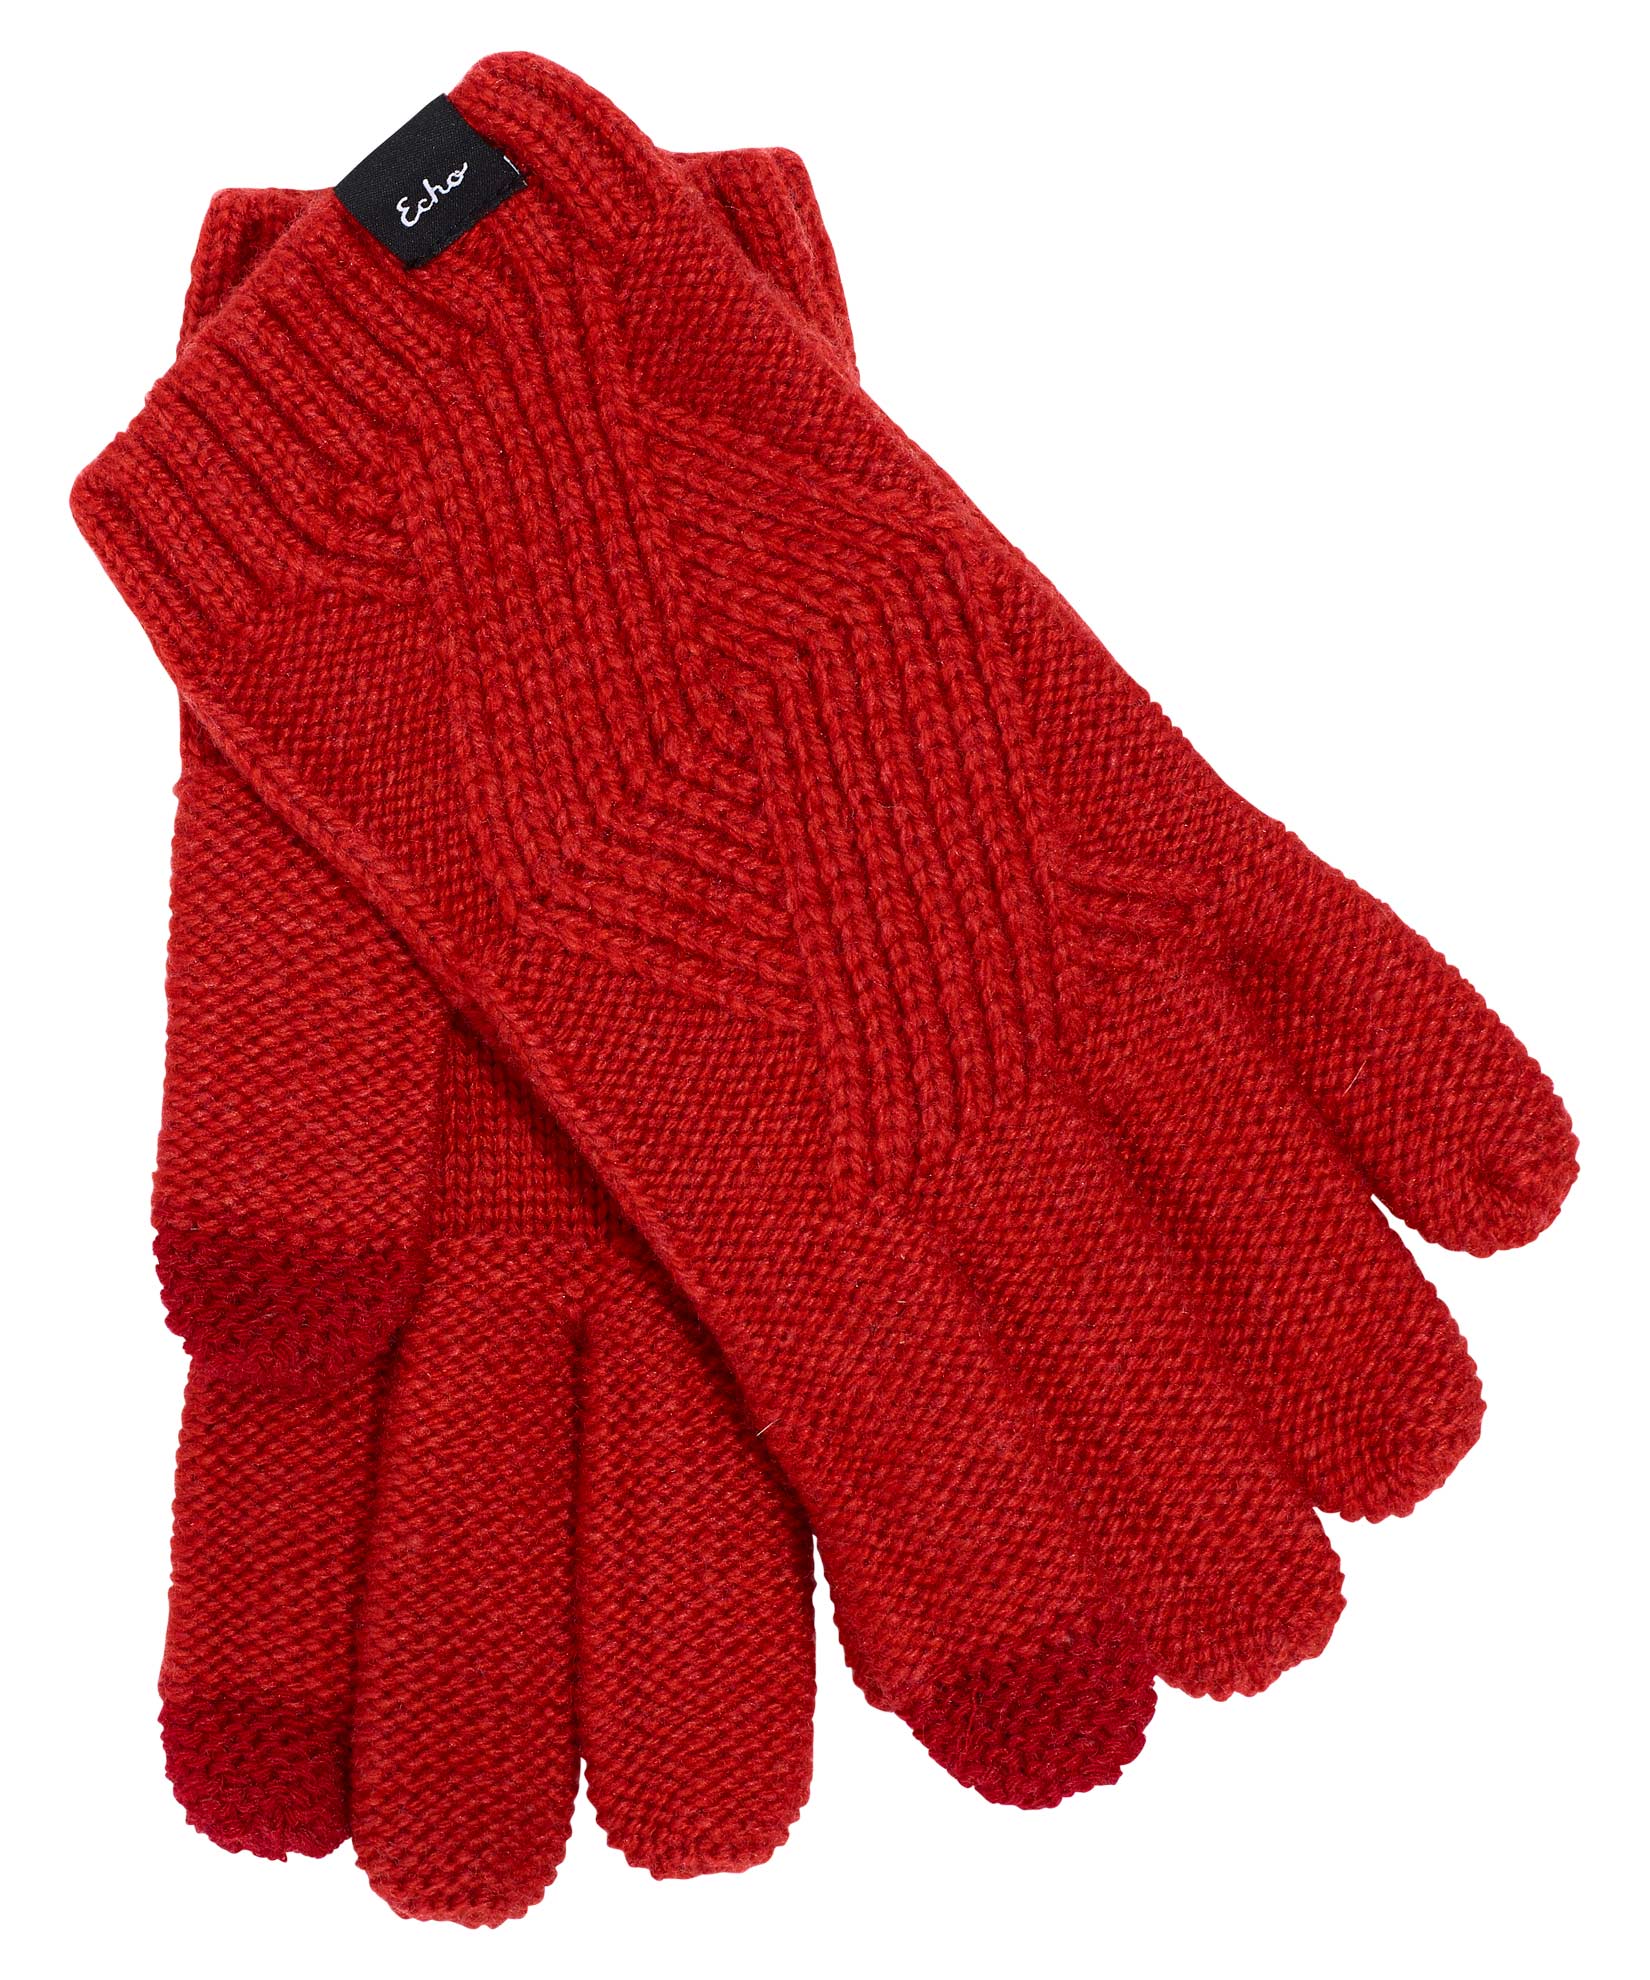 Recycled Cable Glove in color Ruby Red